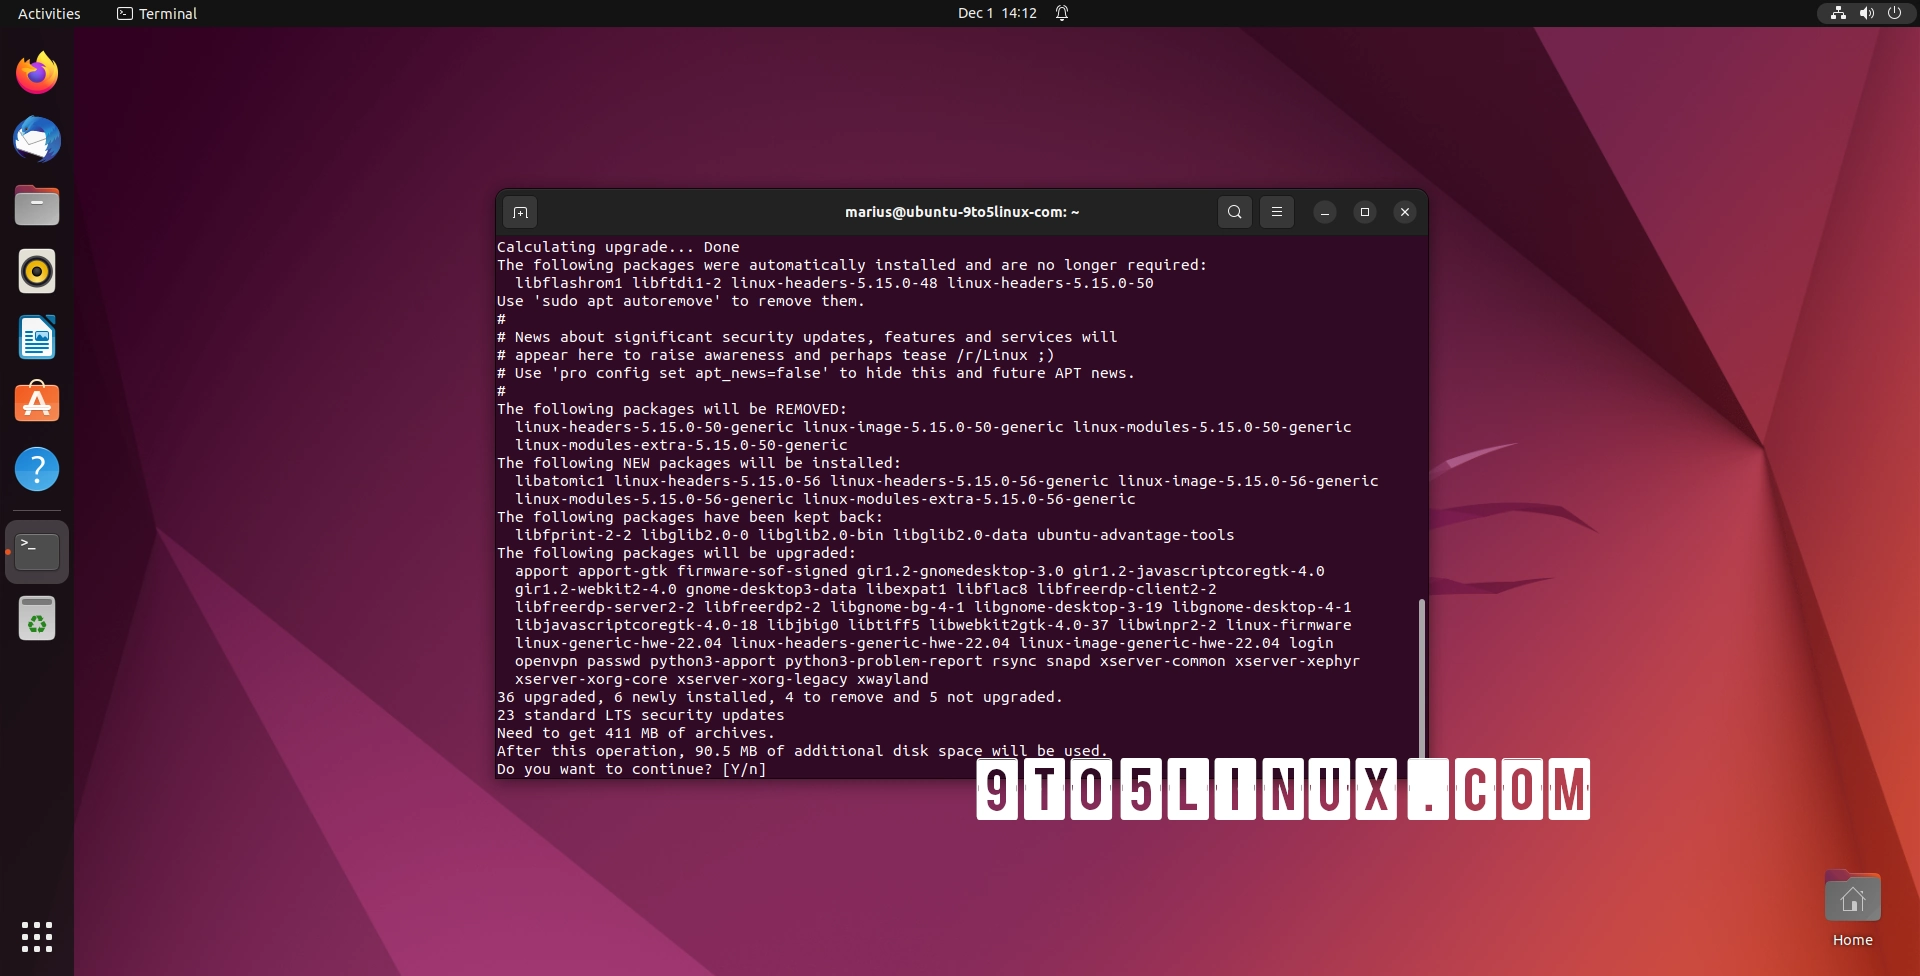 Ubuntu Users Get New Linux Kernel Security Updates, 10 Vulnerabilities Patched